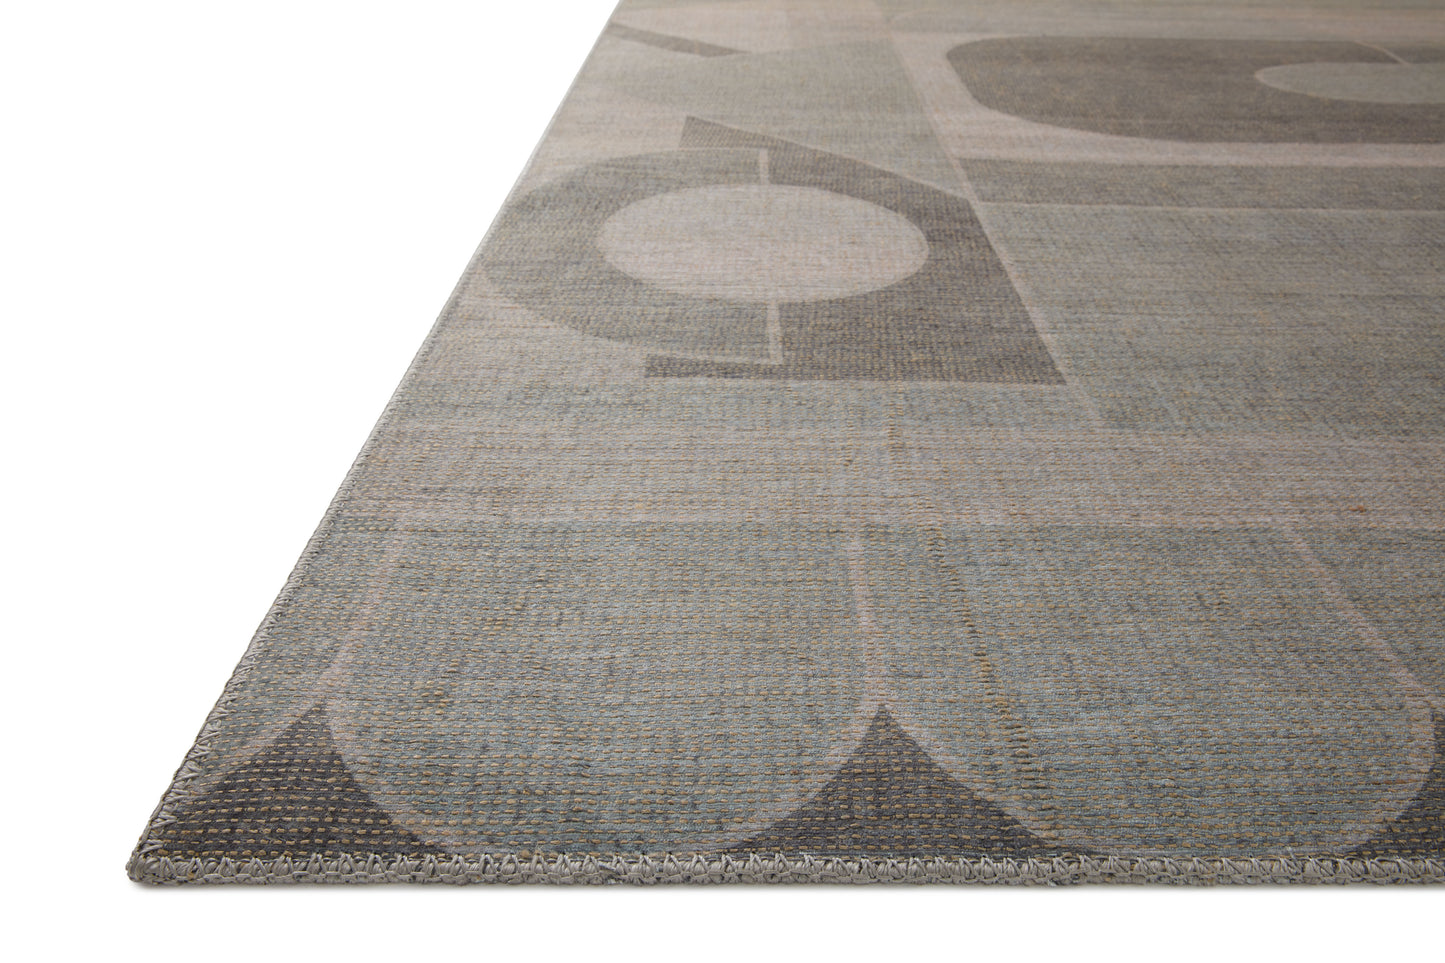 Good Morning ED Synthetic Blend Indoor Area Rug from Justina Blakeney x Loloi